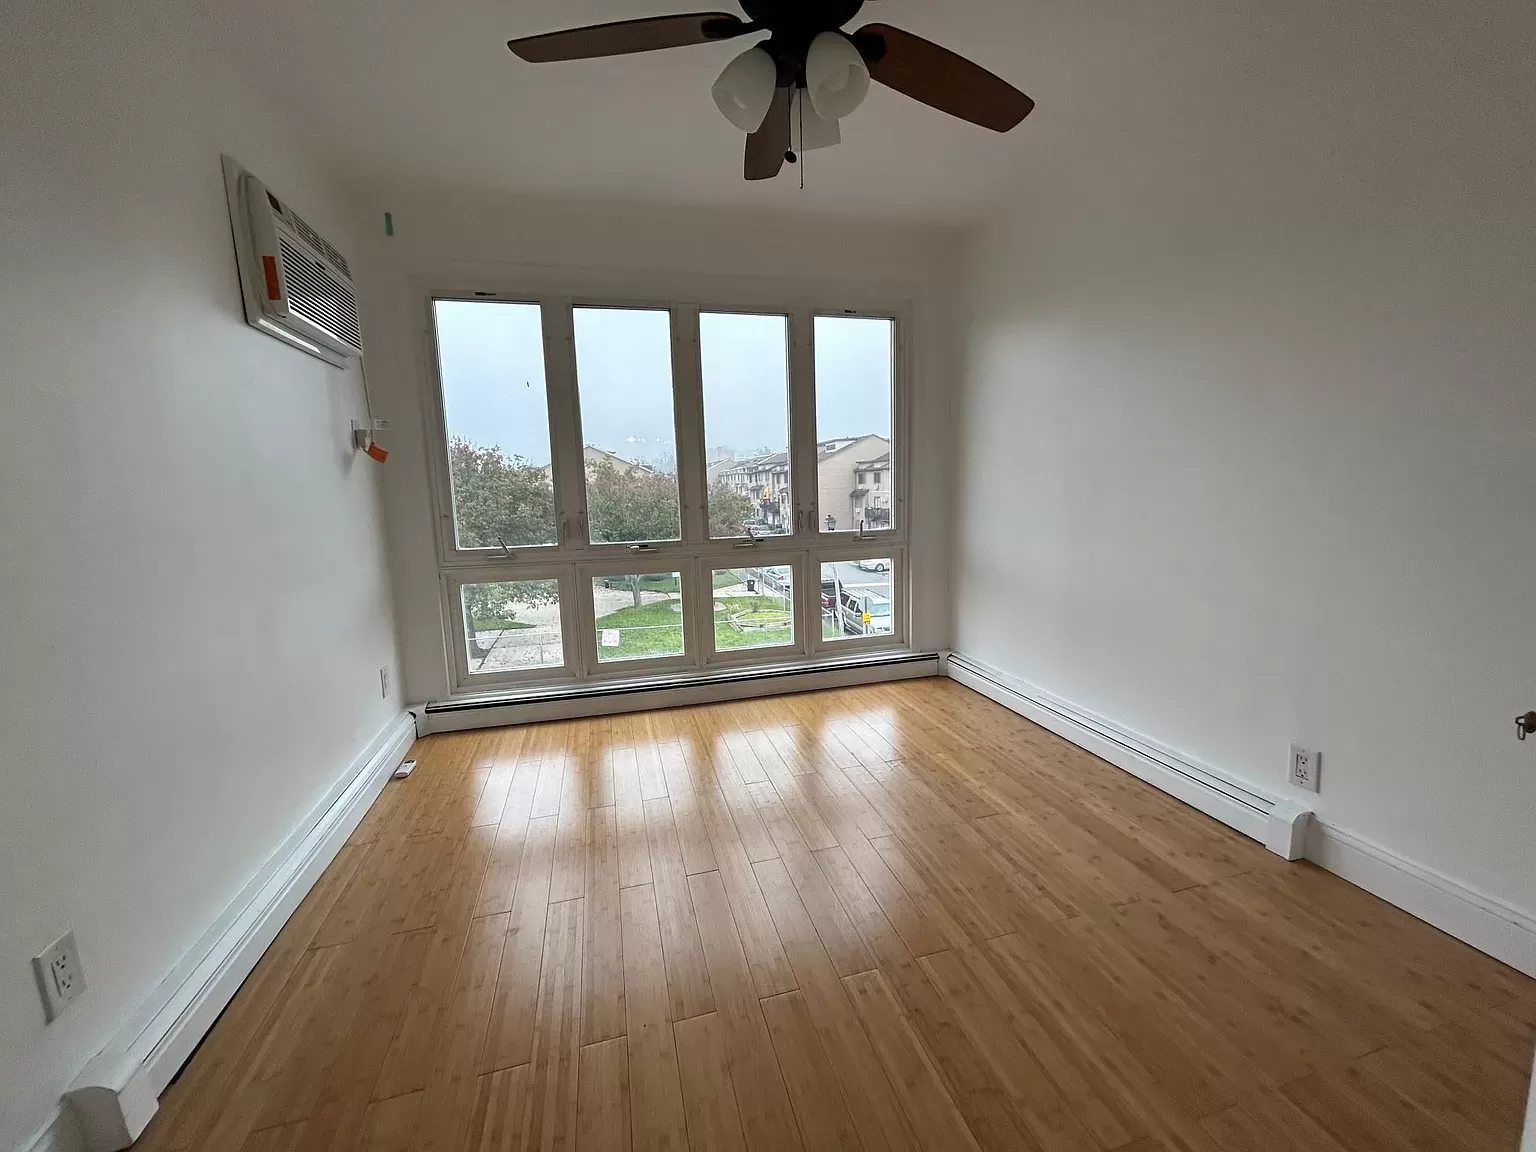 Property for Rent in Heartland Village, Staten Island NY